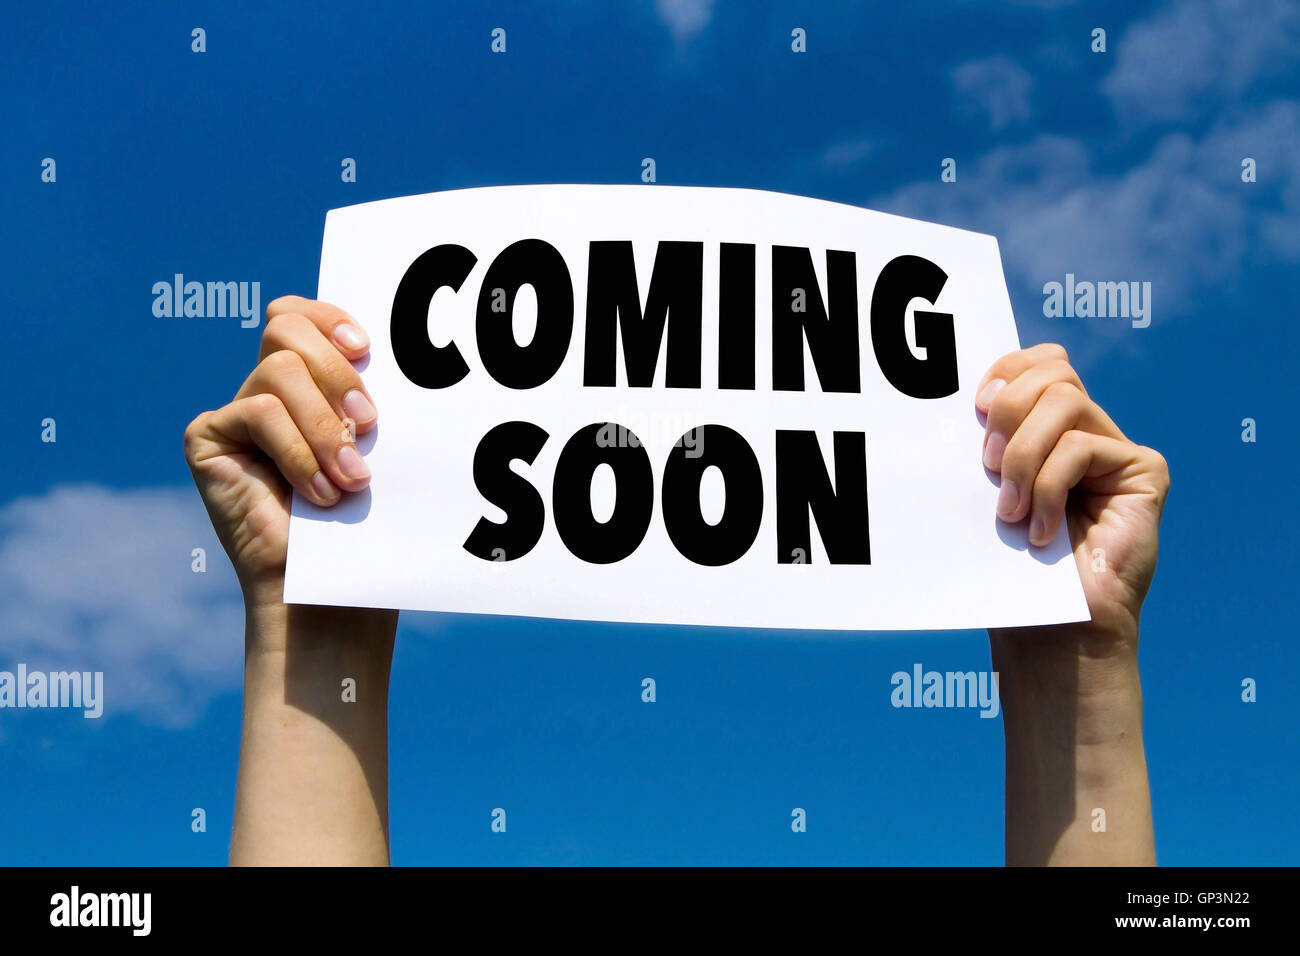 coming soon, message note, hands holding paper sign with announcement Stock Photo